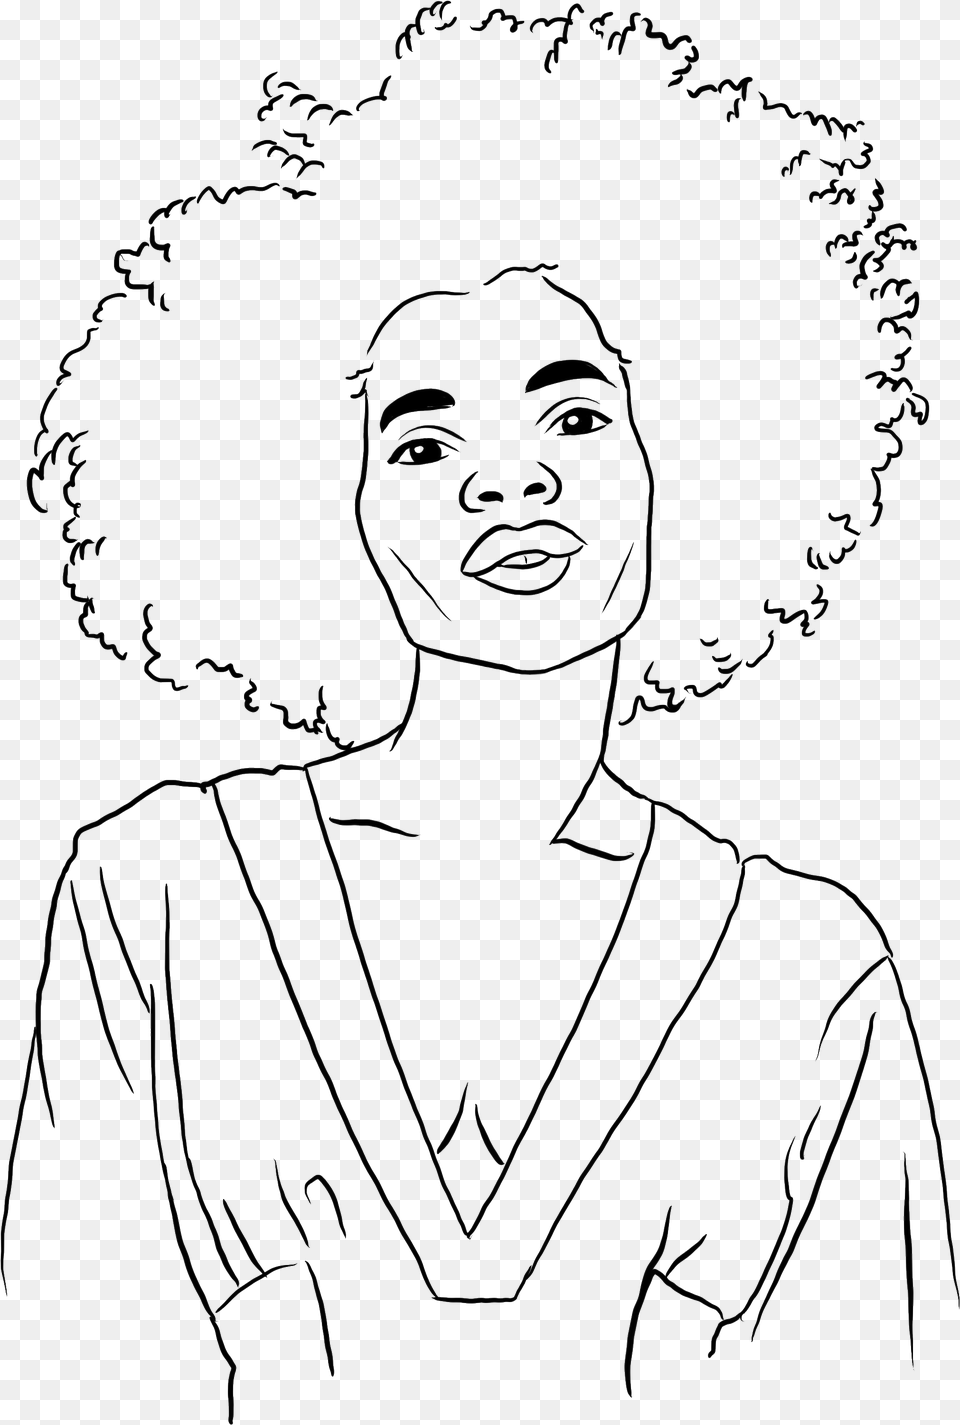 Illustration Of A Woman With Curly Hair Curly Hair Line Art, Drawing, Person, Stencil, Face Free Transparent Png